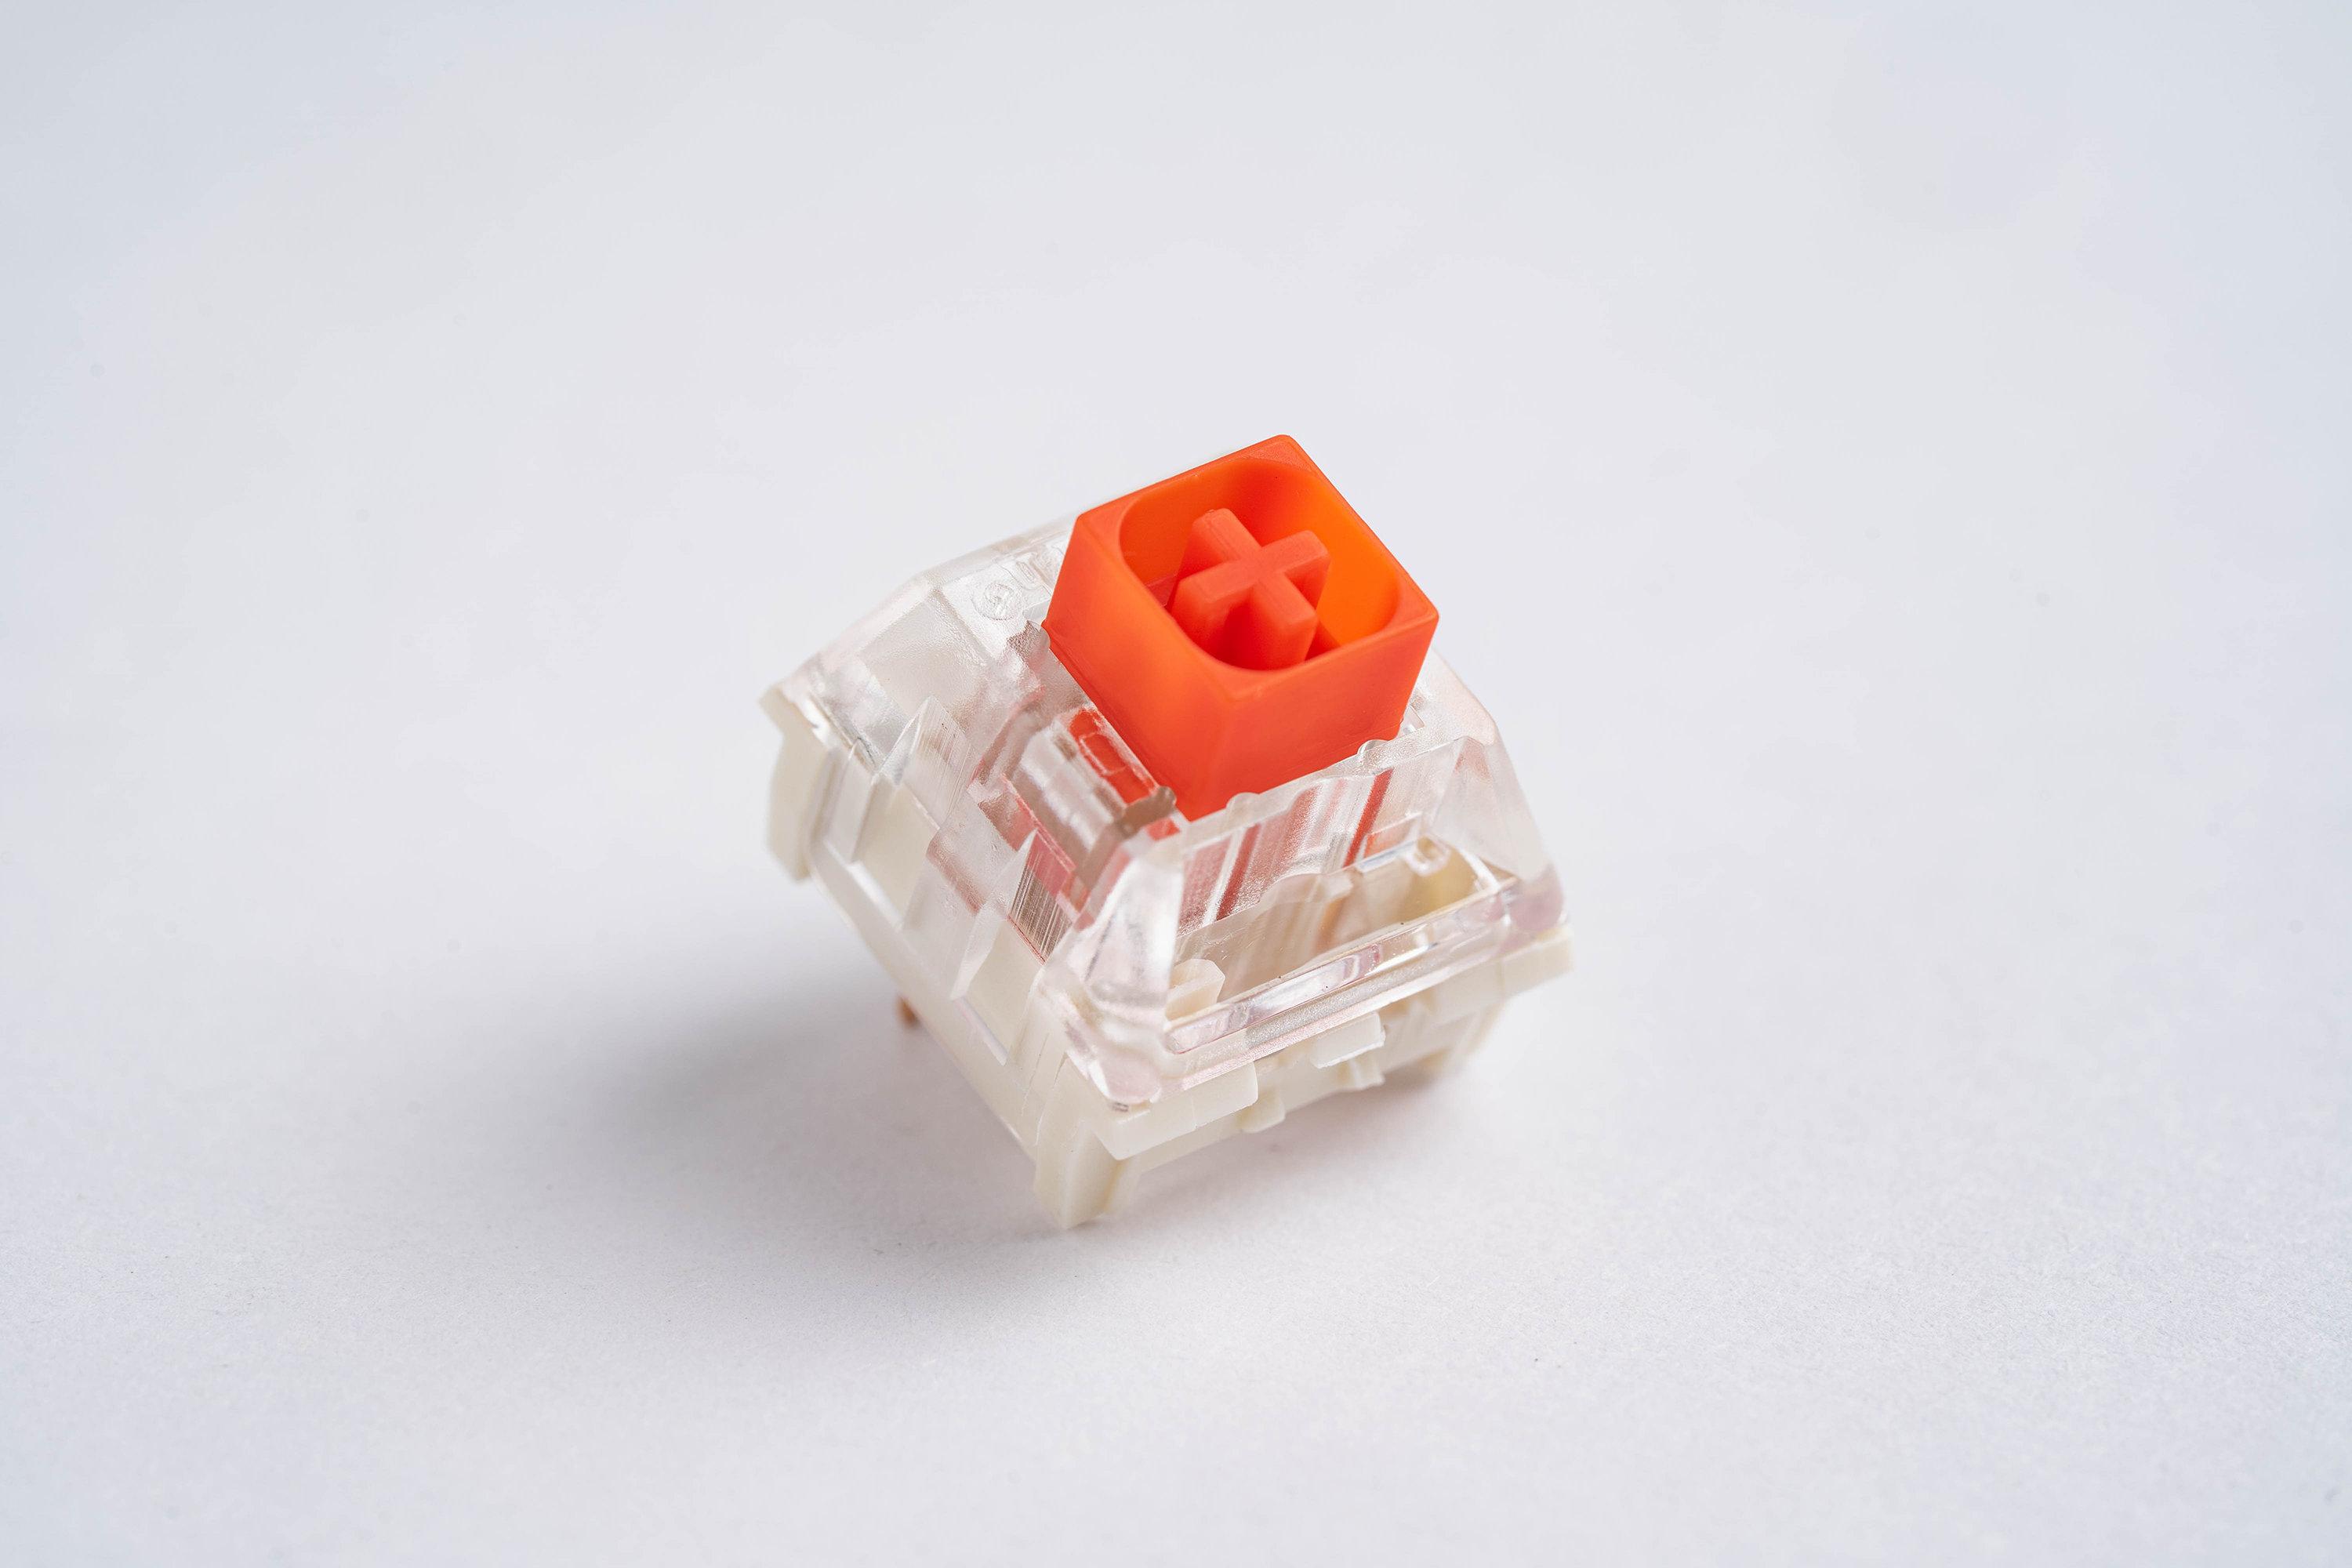 Kailh BOX Red Switches - KeebsForAll